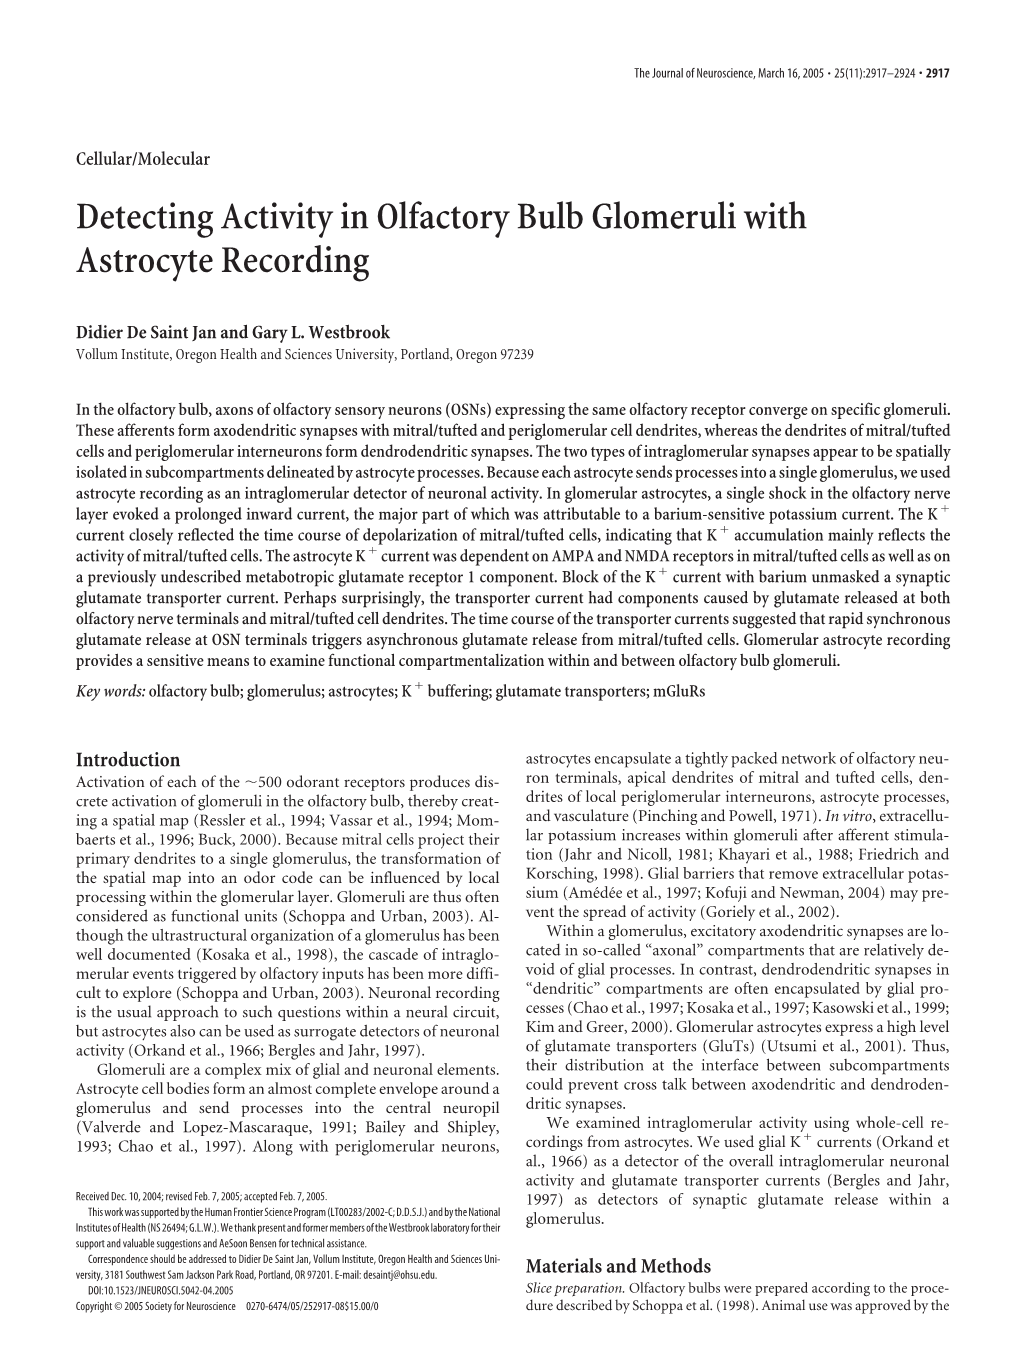 Detecting Activity in Olfactory Bulb Glomeruli with Astrocyte Recording